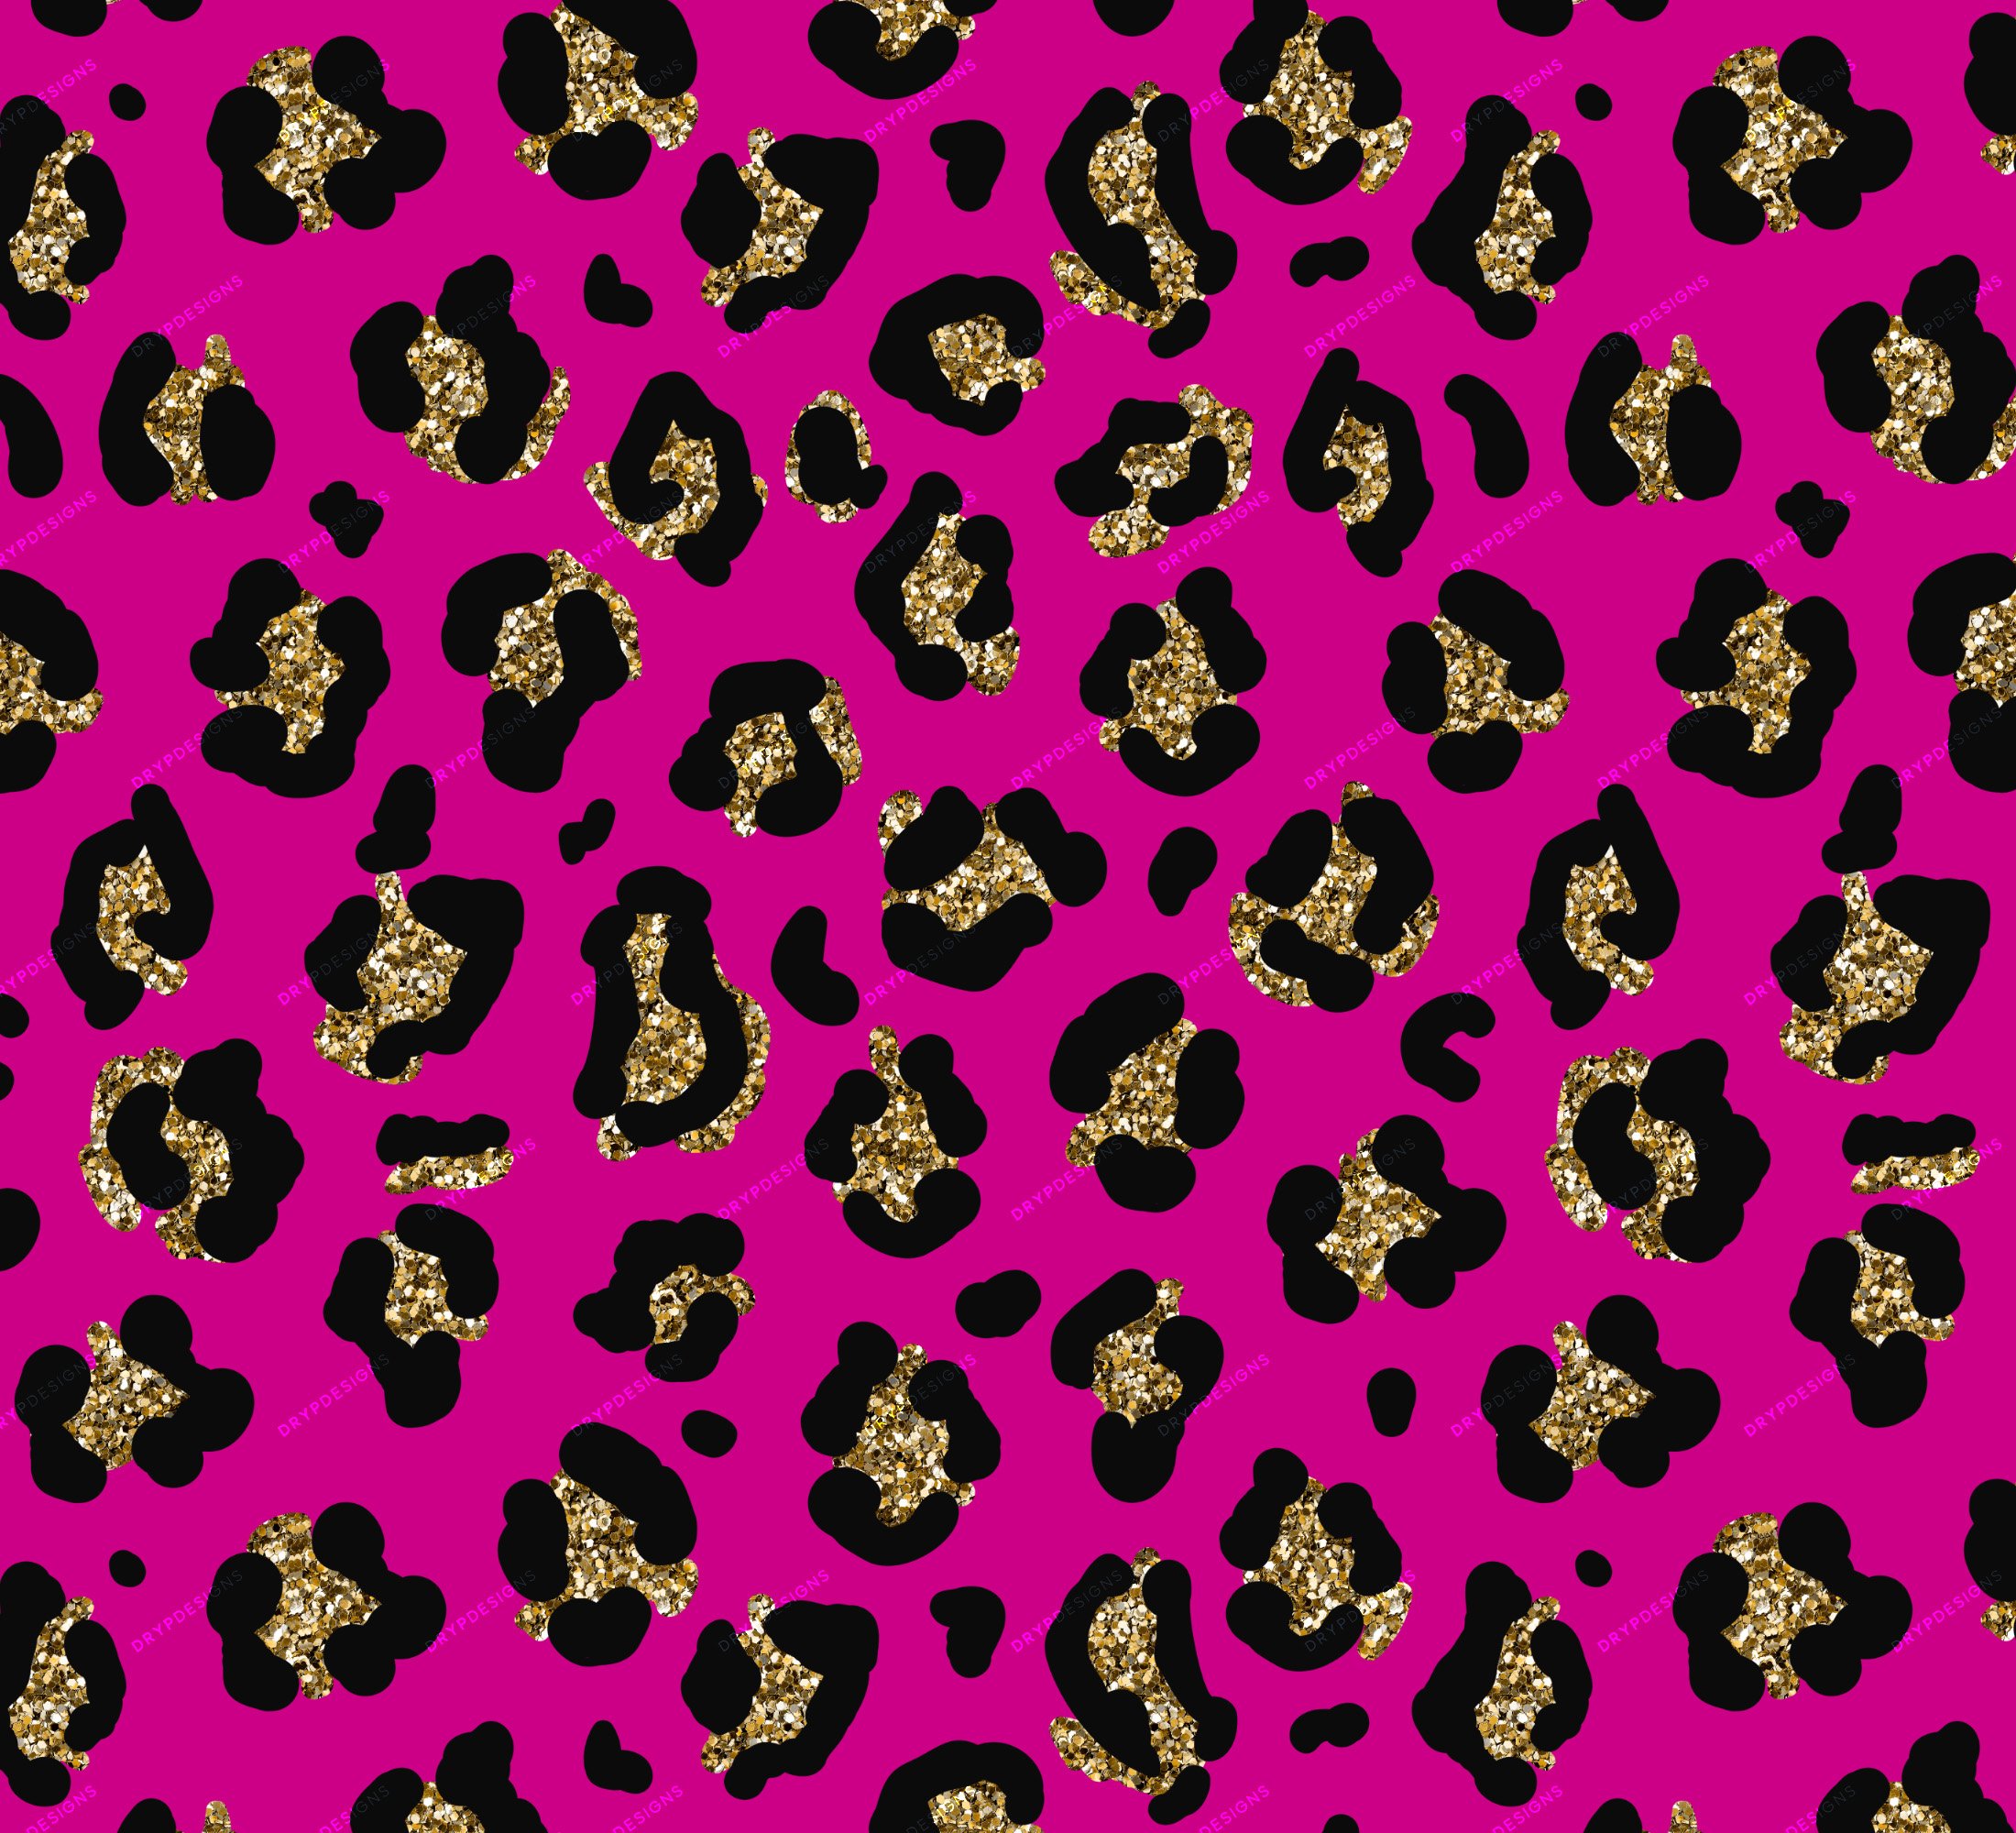 Download Give in to the allure of glittery leopard Wallpaper | Wallpapers .com